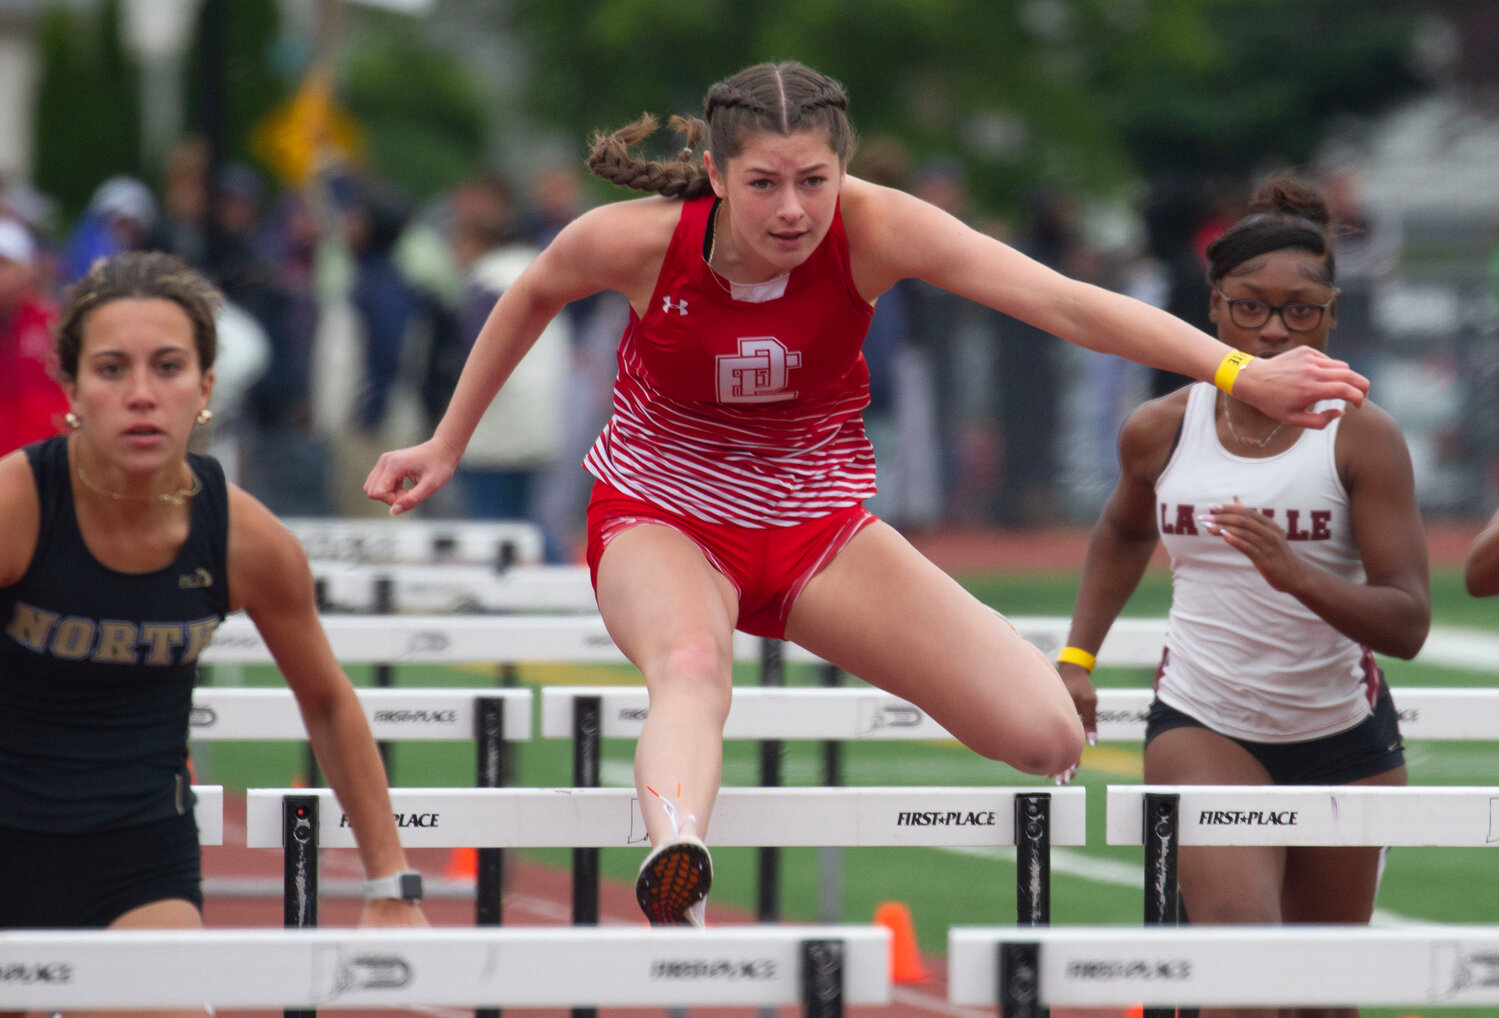 East Providence's Keira Mullen placed in the boys' triple jump at the 2023 state outdoor track and field meet Saturday, June 3, in Providence.